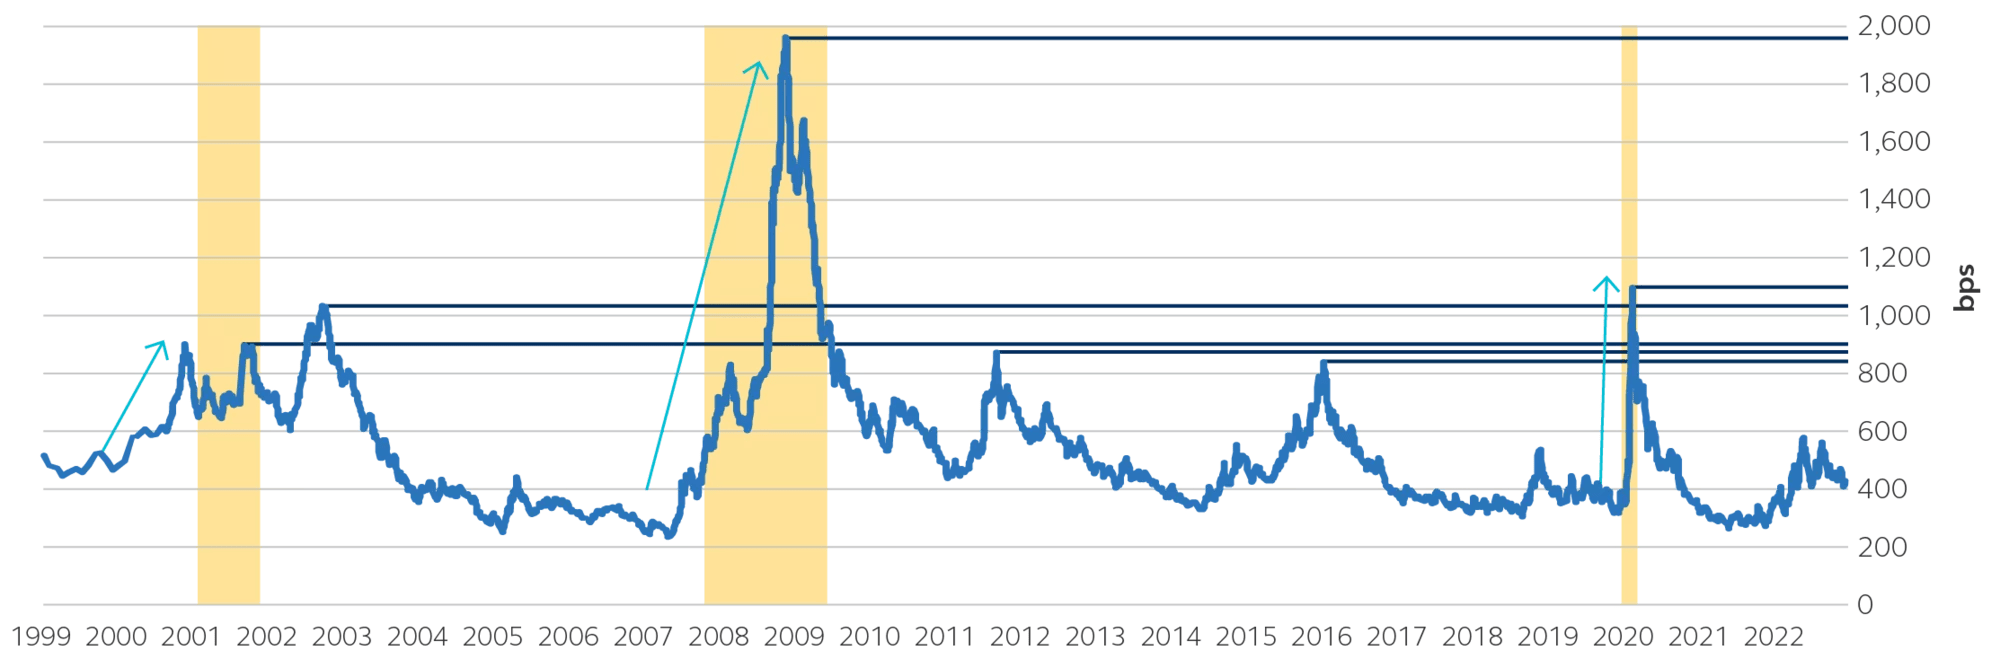 Time series chart of U.S. high yield option-adjusted spread from 1999-2022